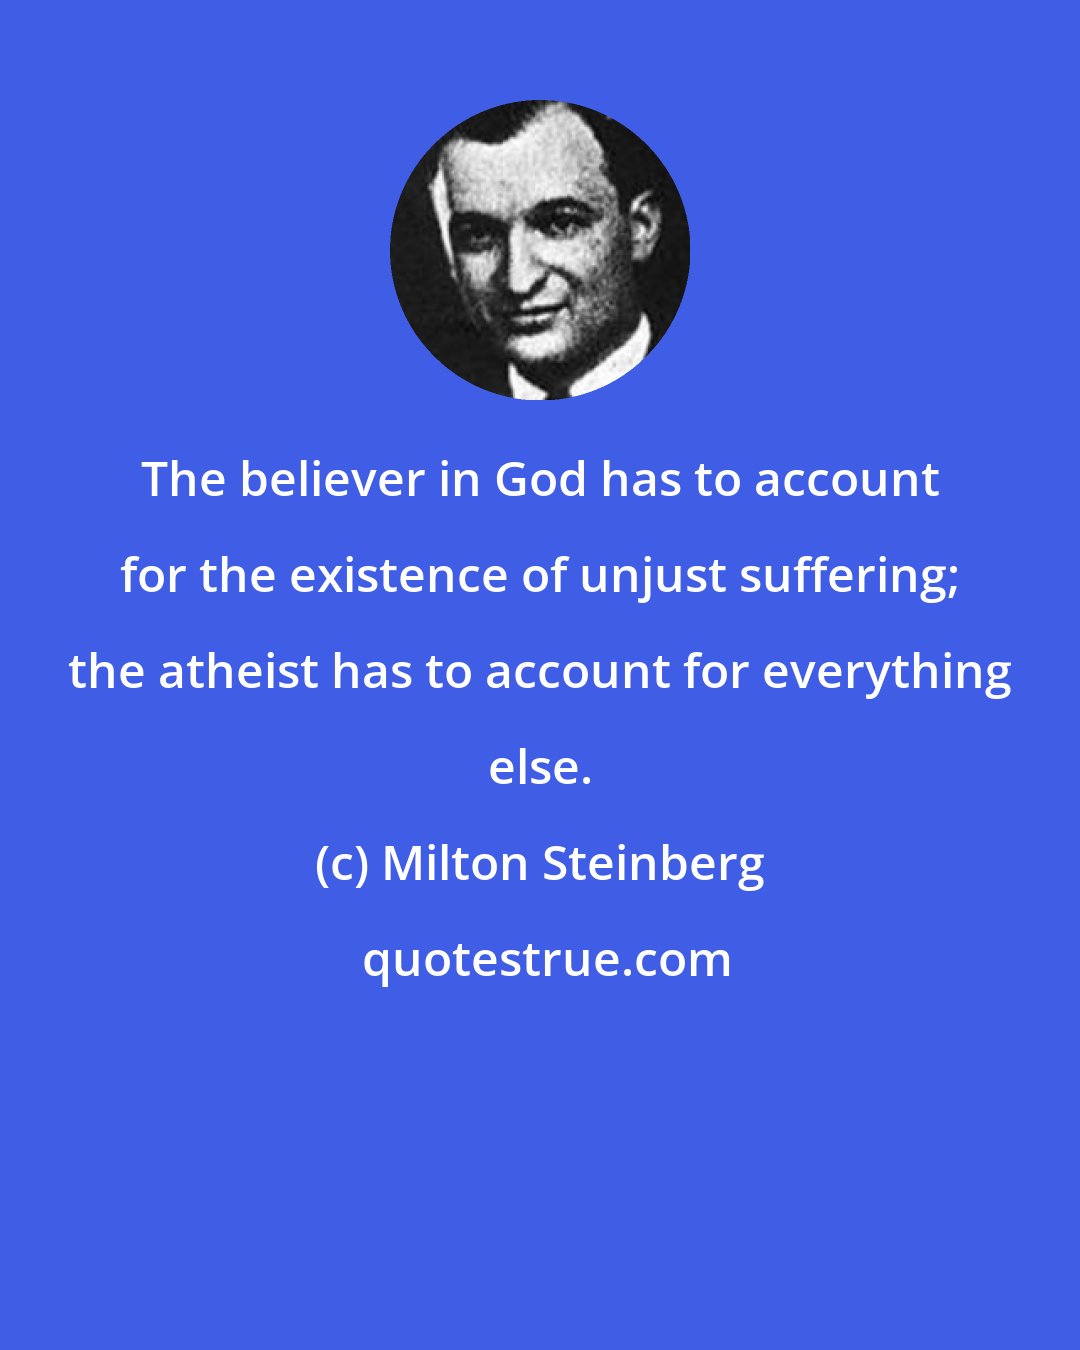 Milton Steinberg: The believer in God has to account for the existence of unjust suffering; the atheist has to account for everything else.